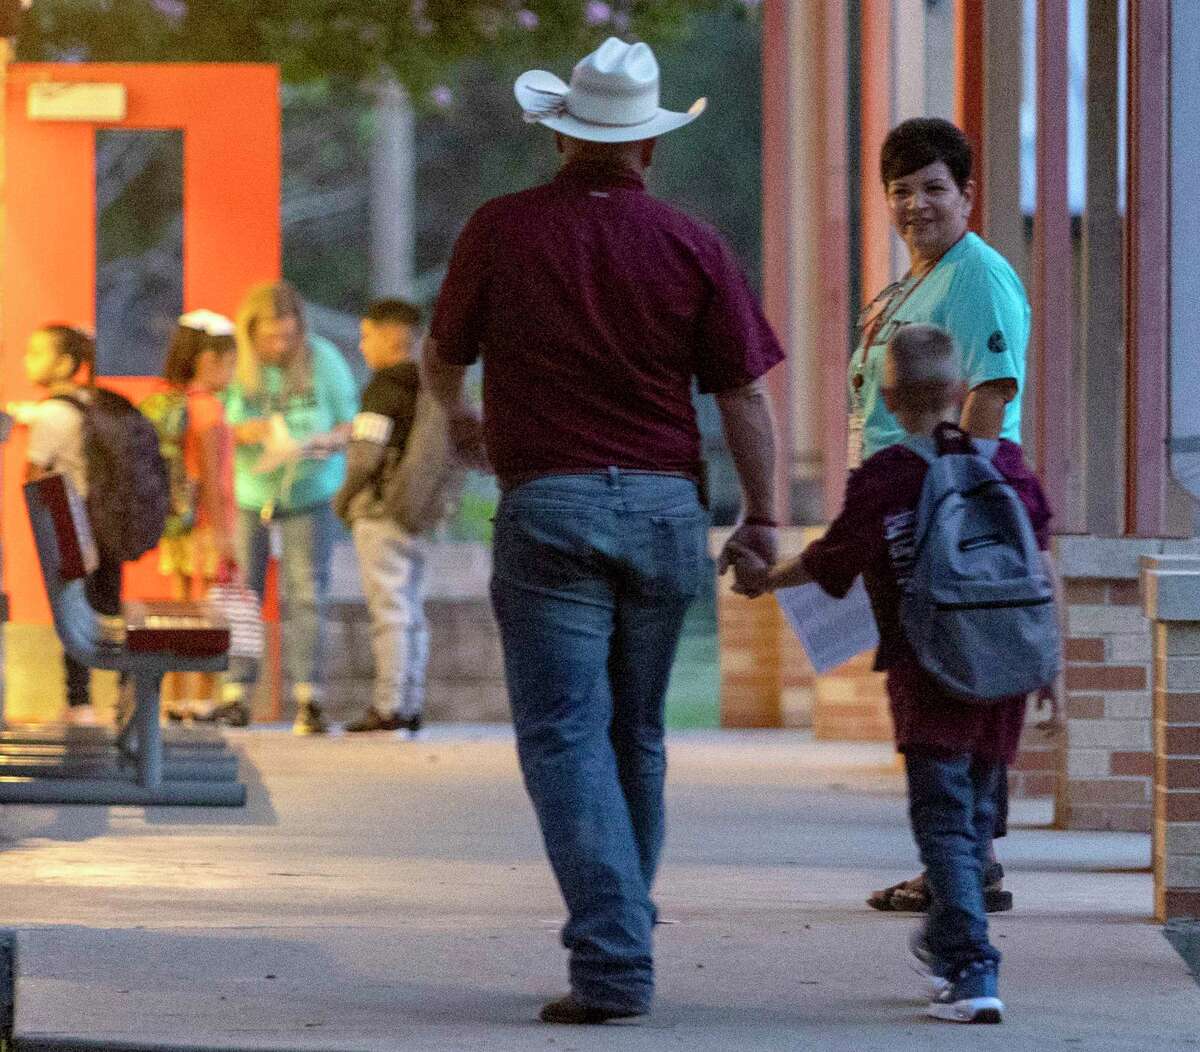 An adult holds a child’s hand as they walk into Uvalde Elementary School on Tuesday, the first day of school for Uvalde Consolidated Independent School District. The start of the 2022-23 school year marked the first time students in the district had returned to classrooms since a gunman killed 19 children and two teachers in May.